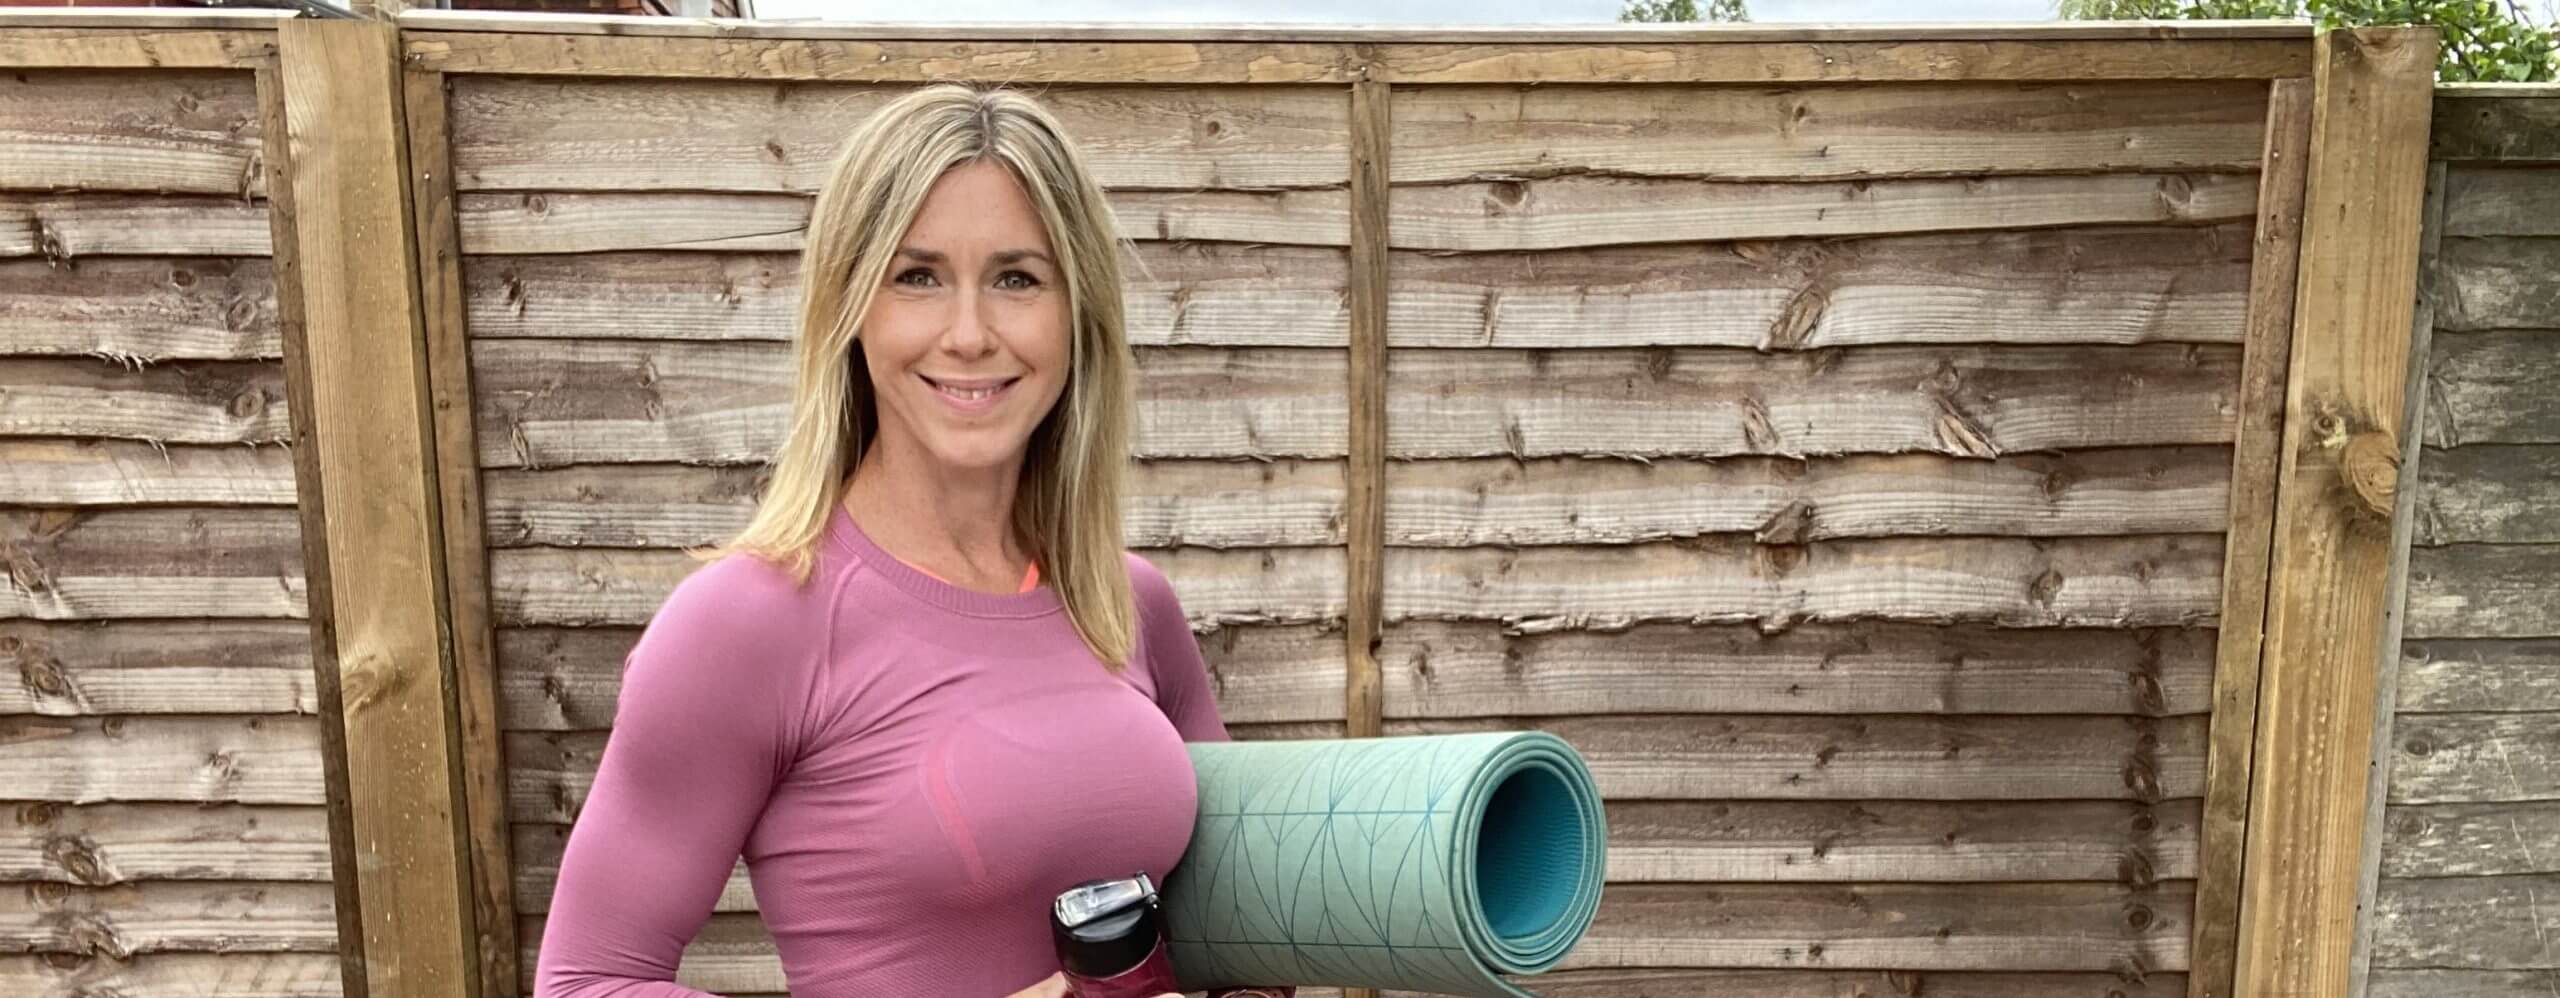 Lucinda Holding Yoga Mat and Drink